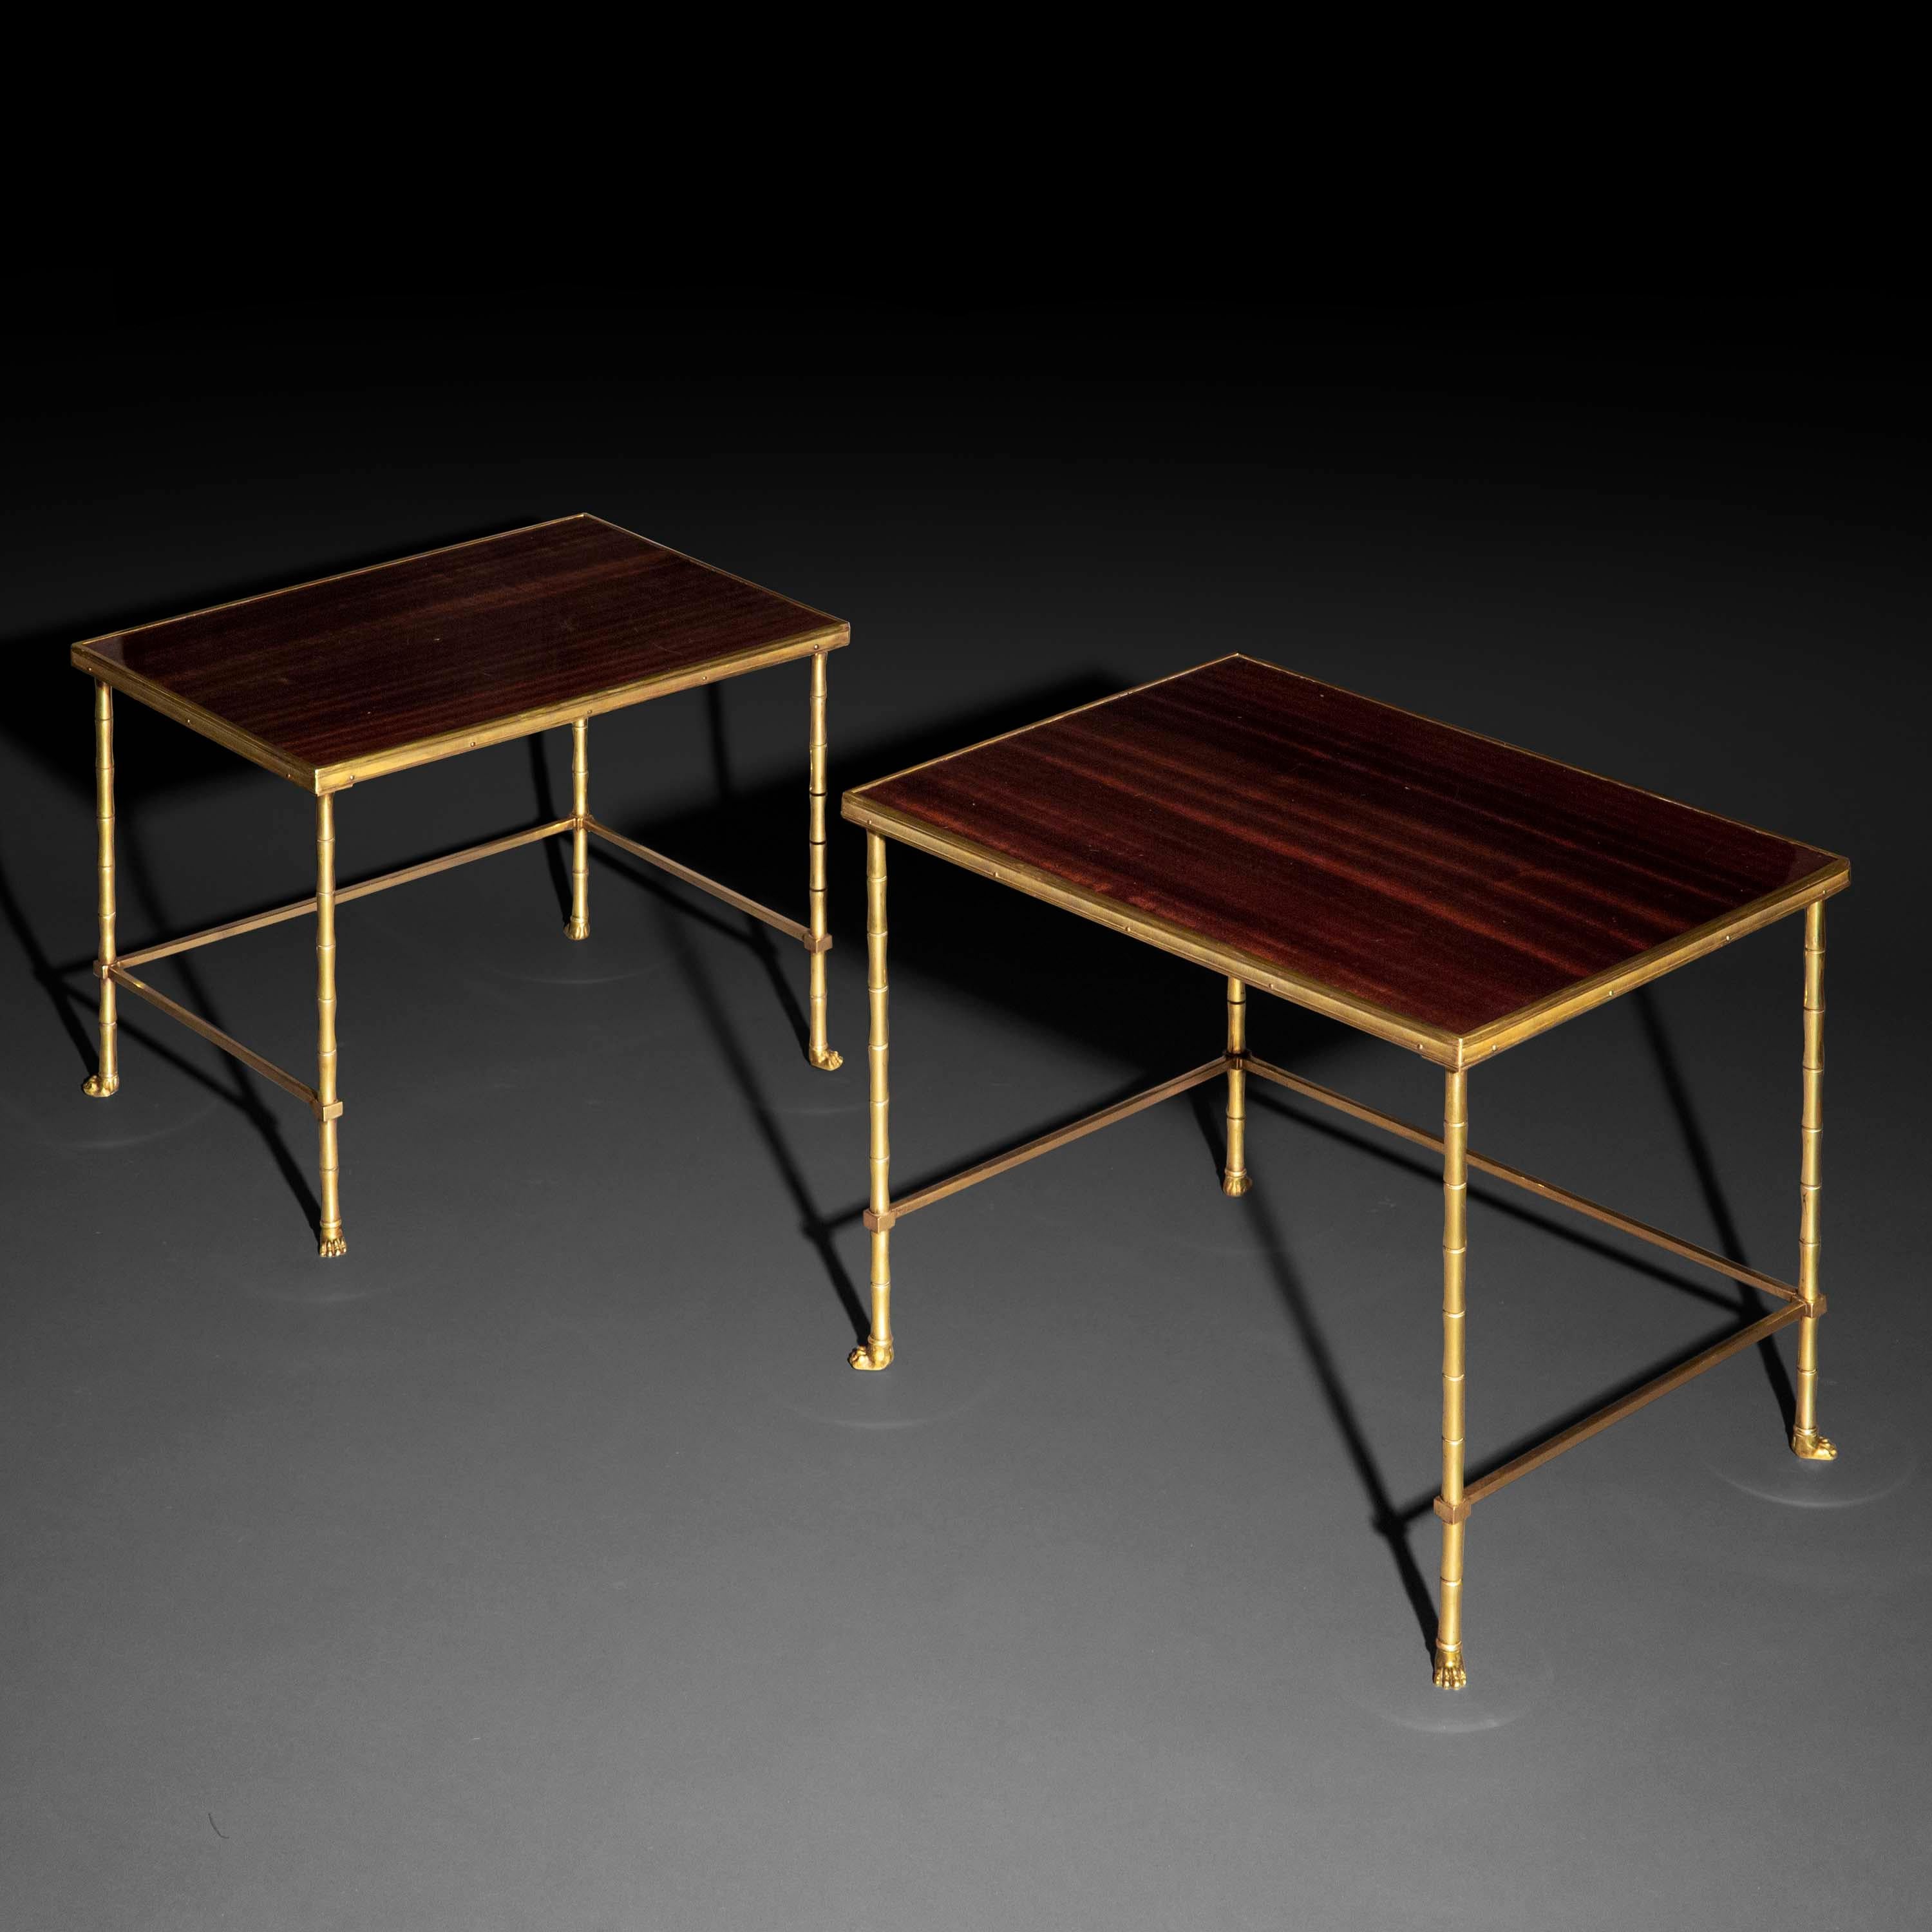 Hollywood Regency Pair of Midcentury Brass Low Tables in the style of Maison Baguès